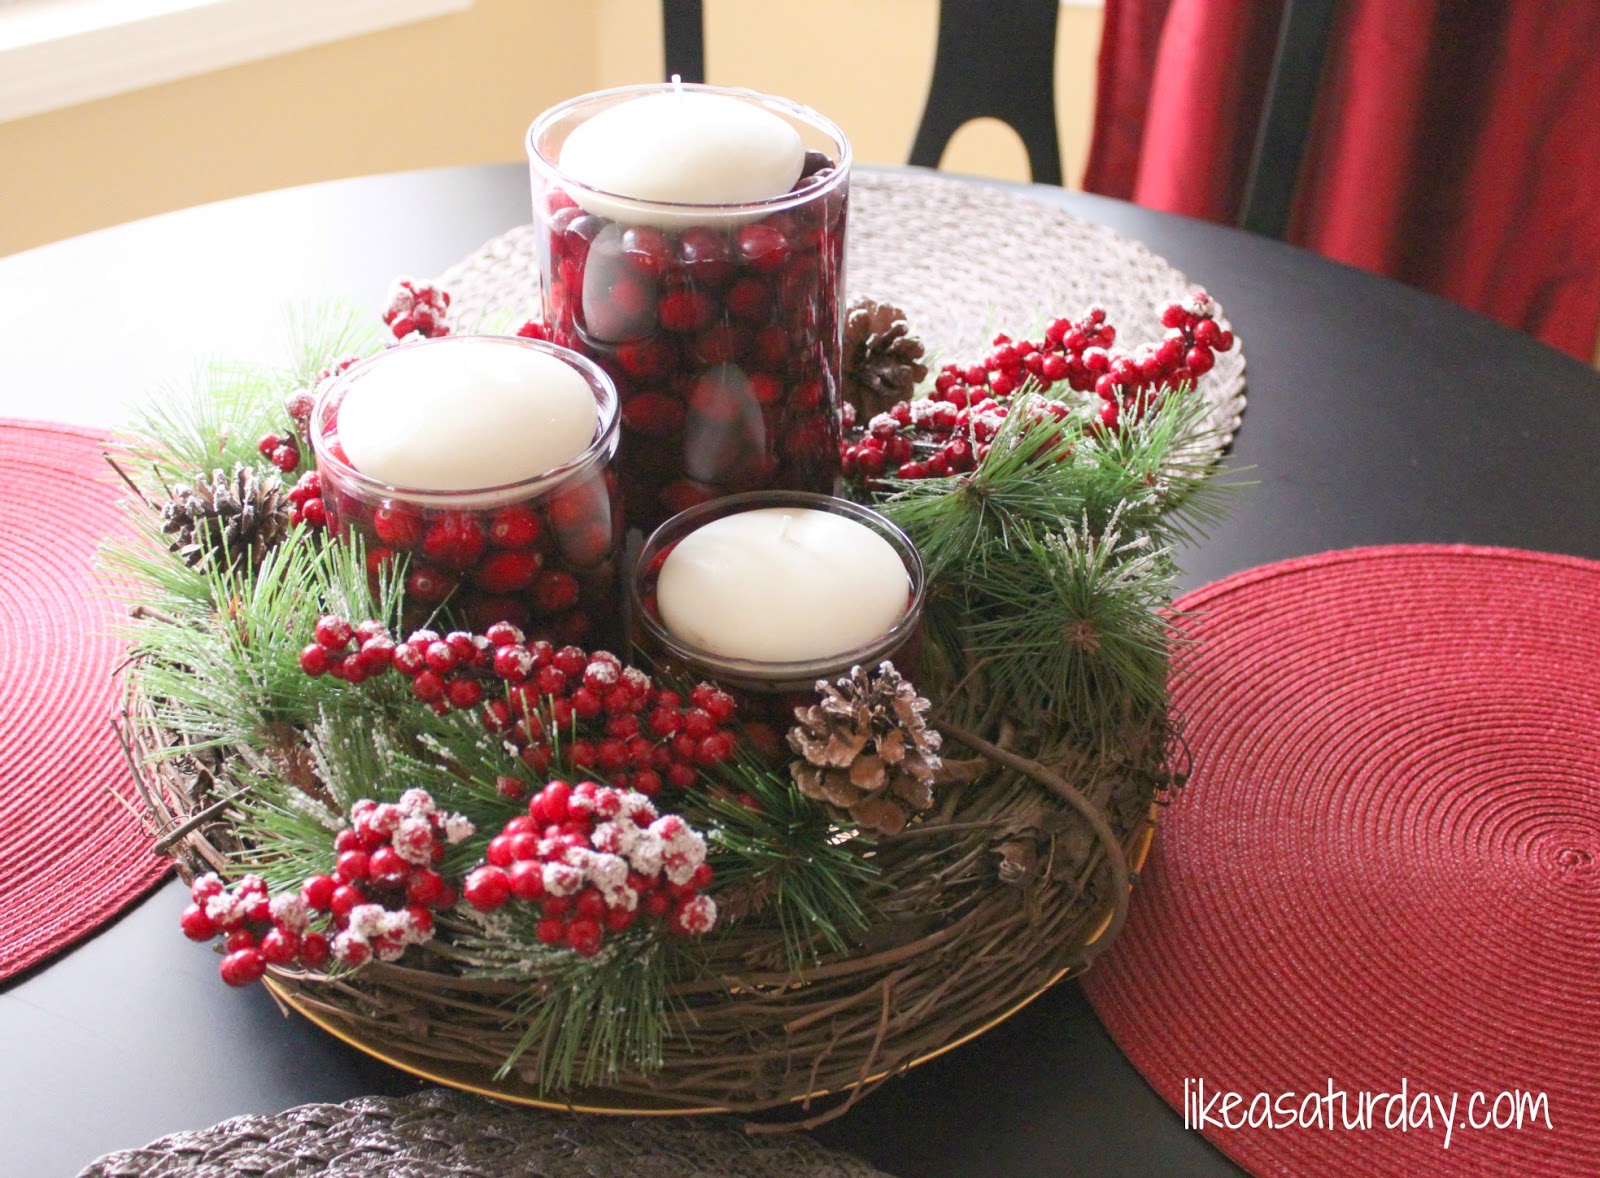 250 Best Christmas Table Centerpieces Ideas In 2021